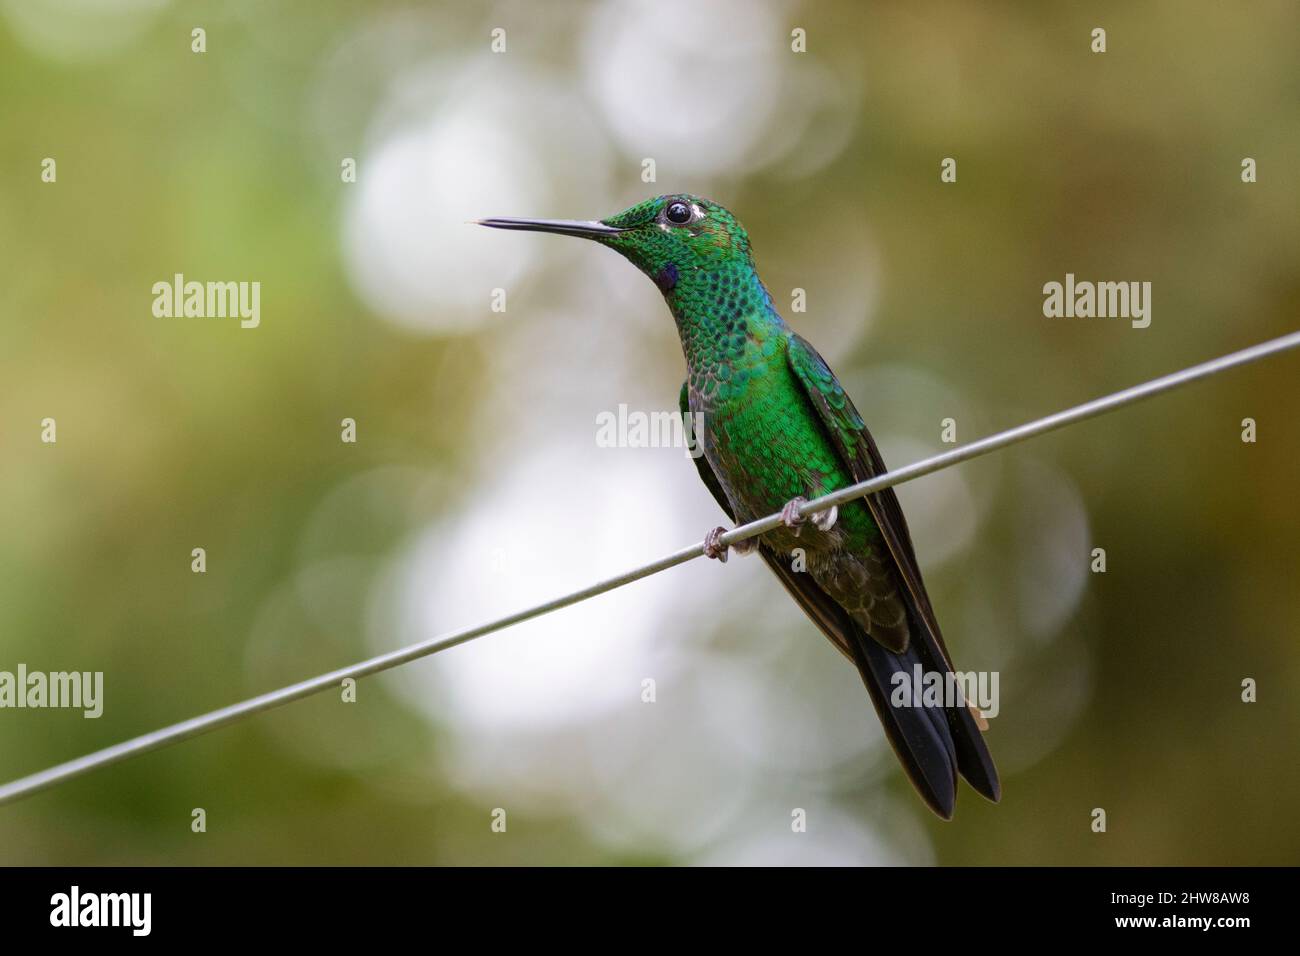 Green-crowned brilliant hummingbird (Heliodoxa jacula), also known as the green-fronted brilliant, Villa Blanca Cloud Forest, San Ramon, Costa Rica Stock Photo